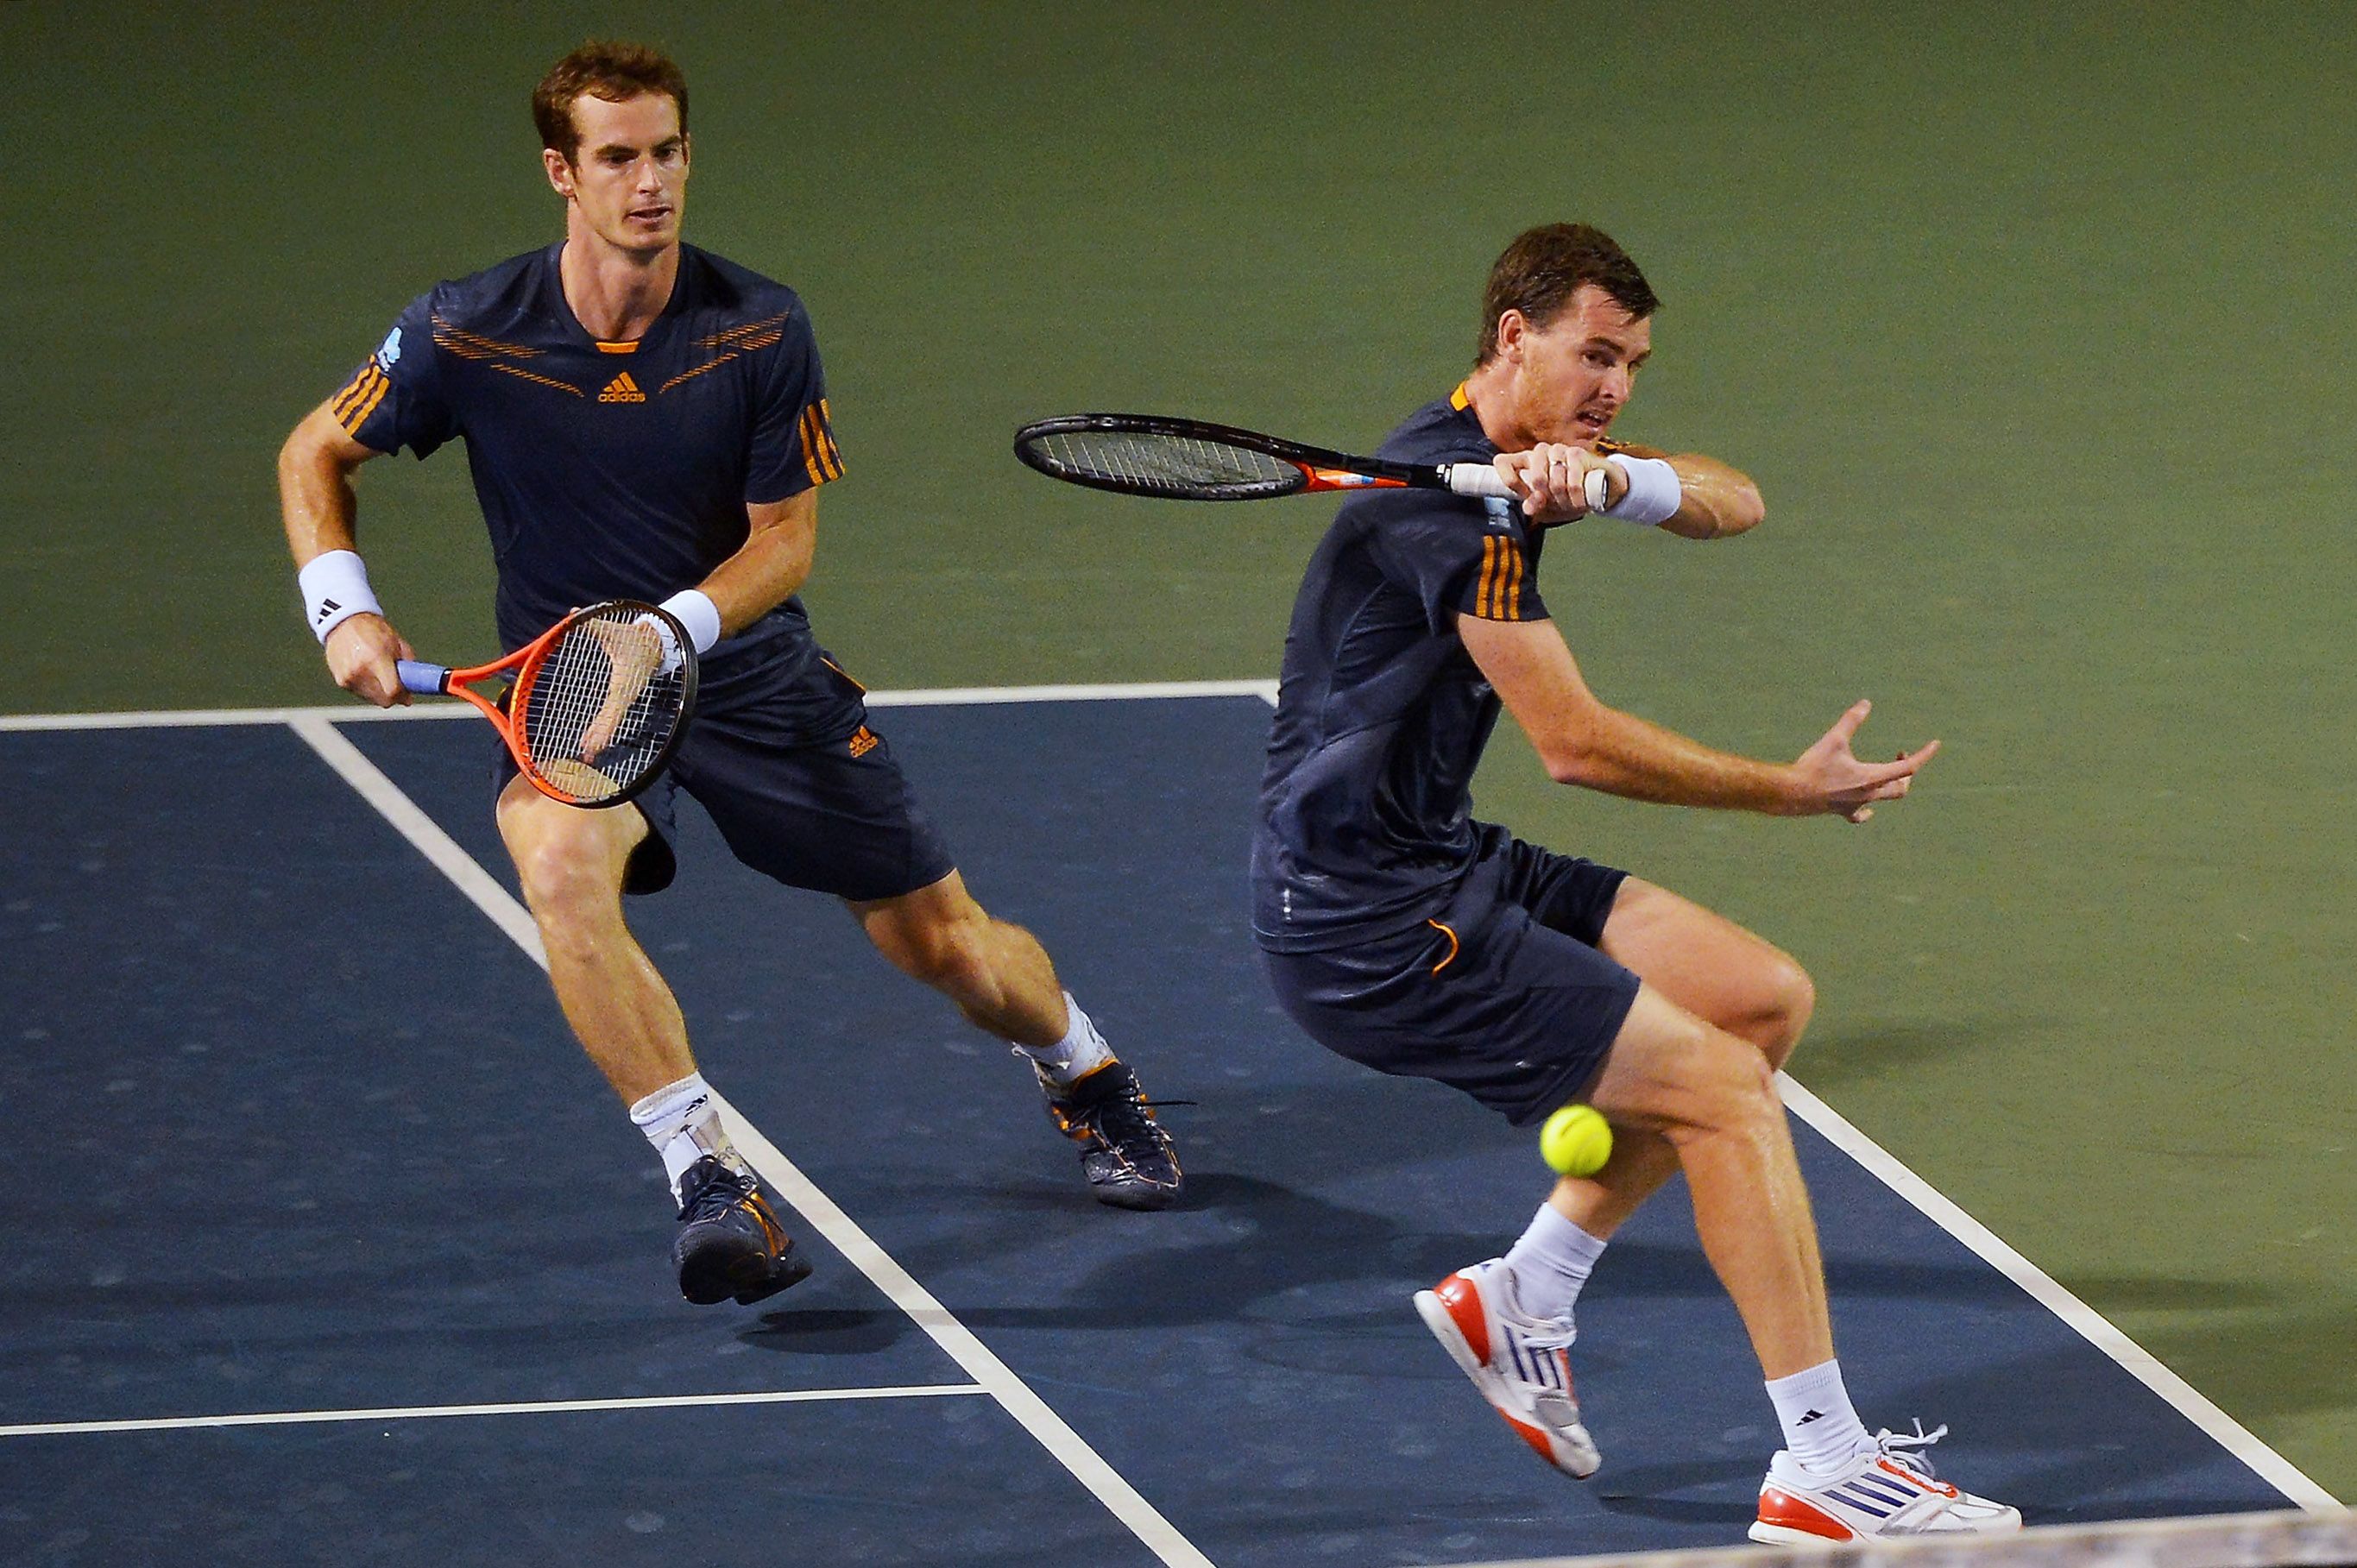 TOKYO, JAPAN - OCTOBER 05: (L-R) Andy Murray and Jamie Murray of Great Britain in action in their quater final match against Radek Stepanek of the Czech Republic and Leander Paes of India during day five of the Rakuten Open at Ariake Colosseum on October 5, 2012 in Tokyo, Japan. (Photo by Koki Nagahama/Getty Images)